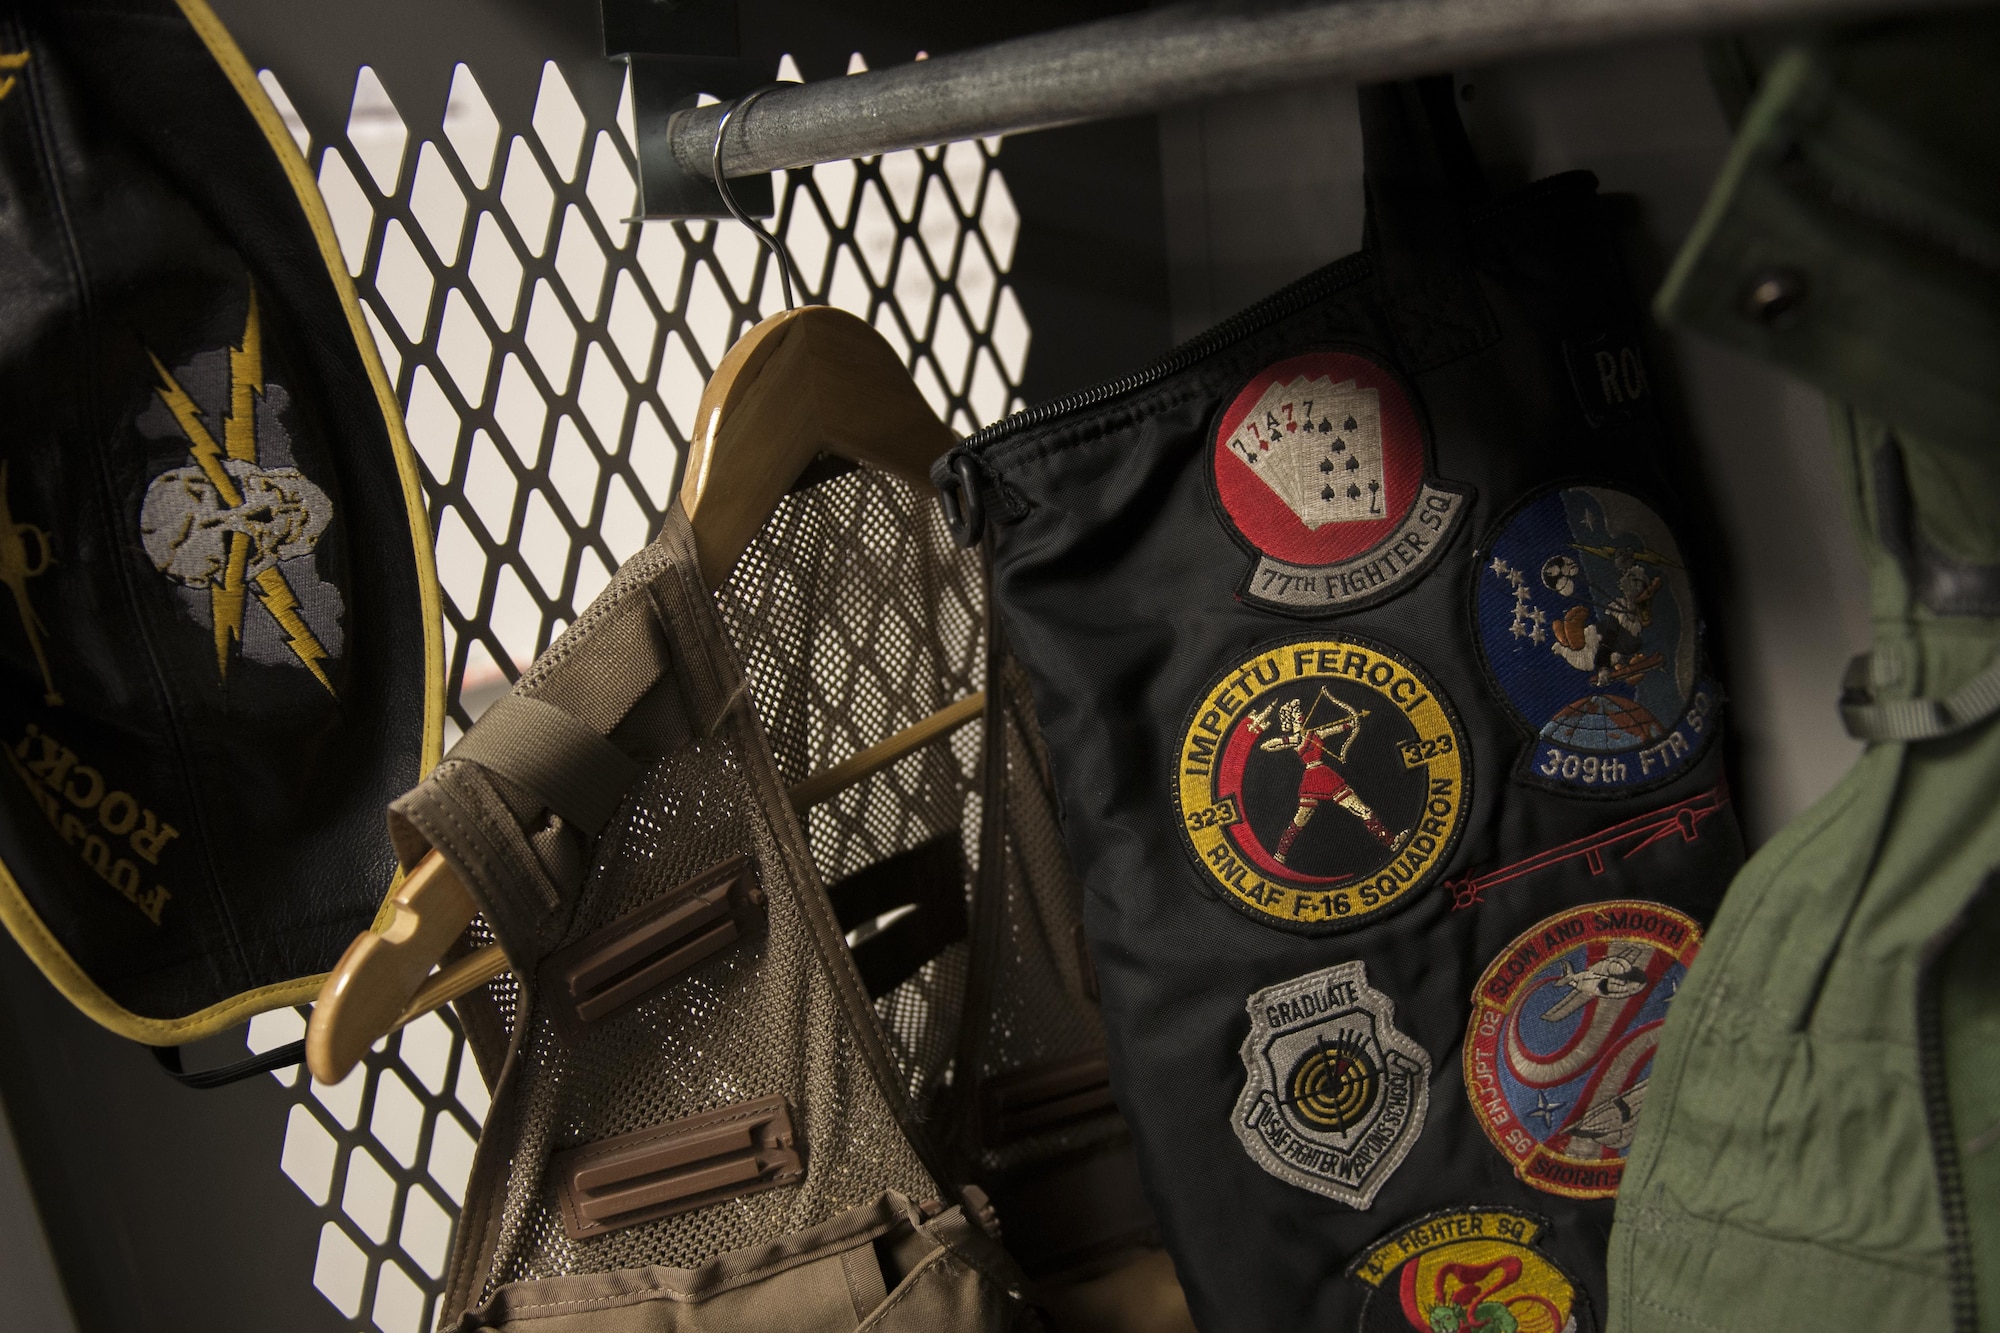 455th Expeditionary Operation Group Commander Col. Henry Rogers' helmet bag, covered in patches from various fighter squadrons he's flown with, hangs in a locker at the 421st Expeditionary Fighter Squadron at Bagram Airfield, Afghanistan, Nov. 27, 2015. Rogers became one of only a couple-hundred F-16 pilots worldwide to surpass 3,000 flying hours in the F-16 on Oct. 29, 2015. He followed that up with reaching 1,000 combat hours in the fighter workhorse on Nov. 7, 2015. (U.S. Air Force photo by Tech. Sgt. Robert Cloys/Released)
